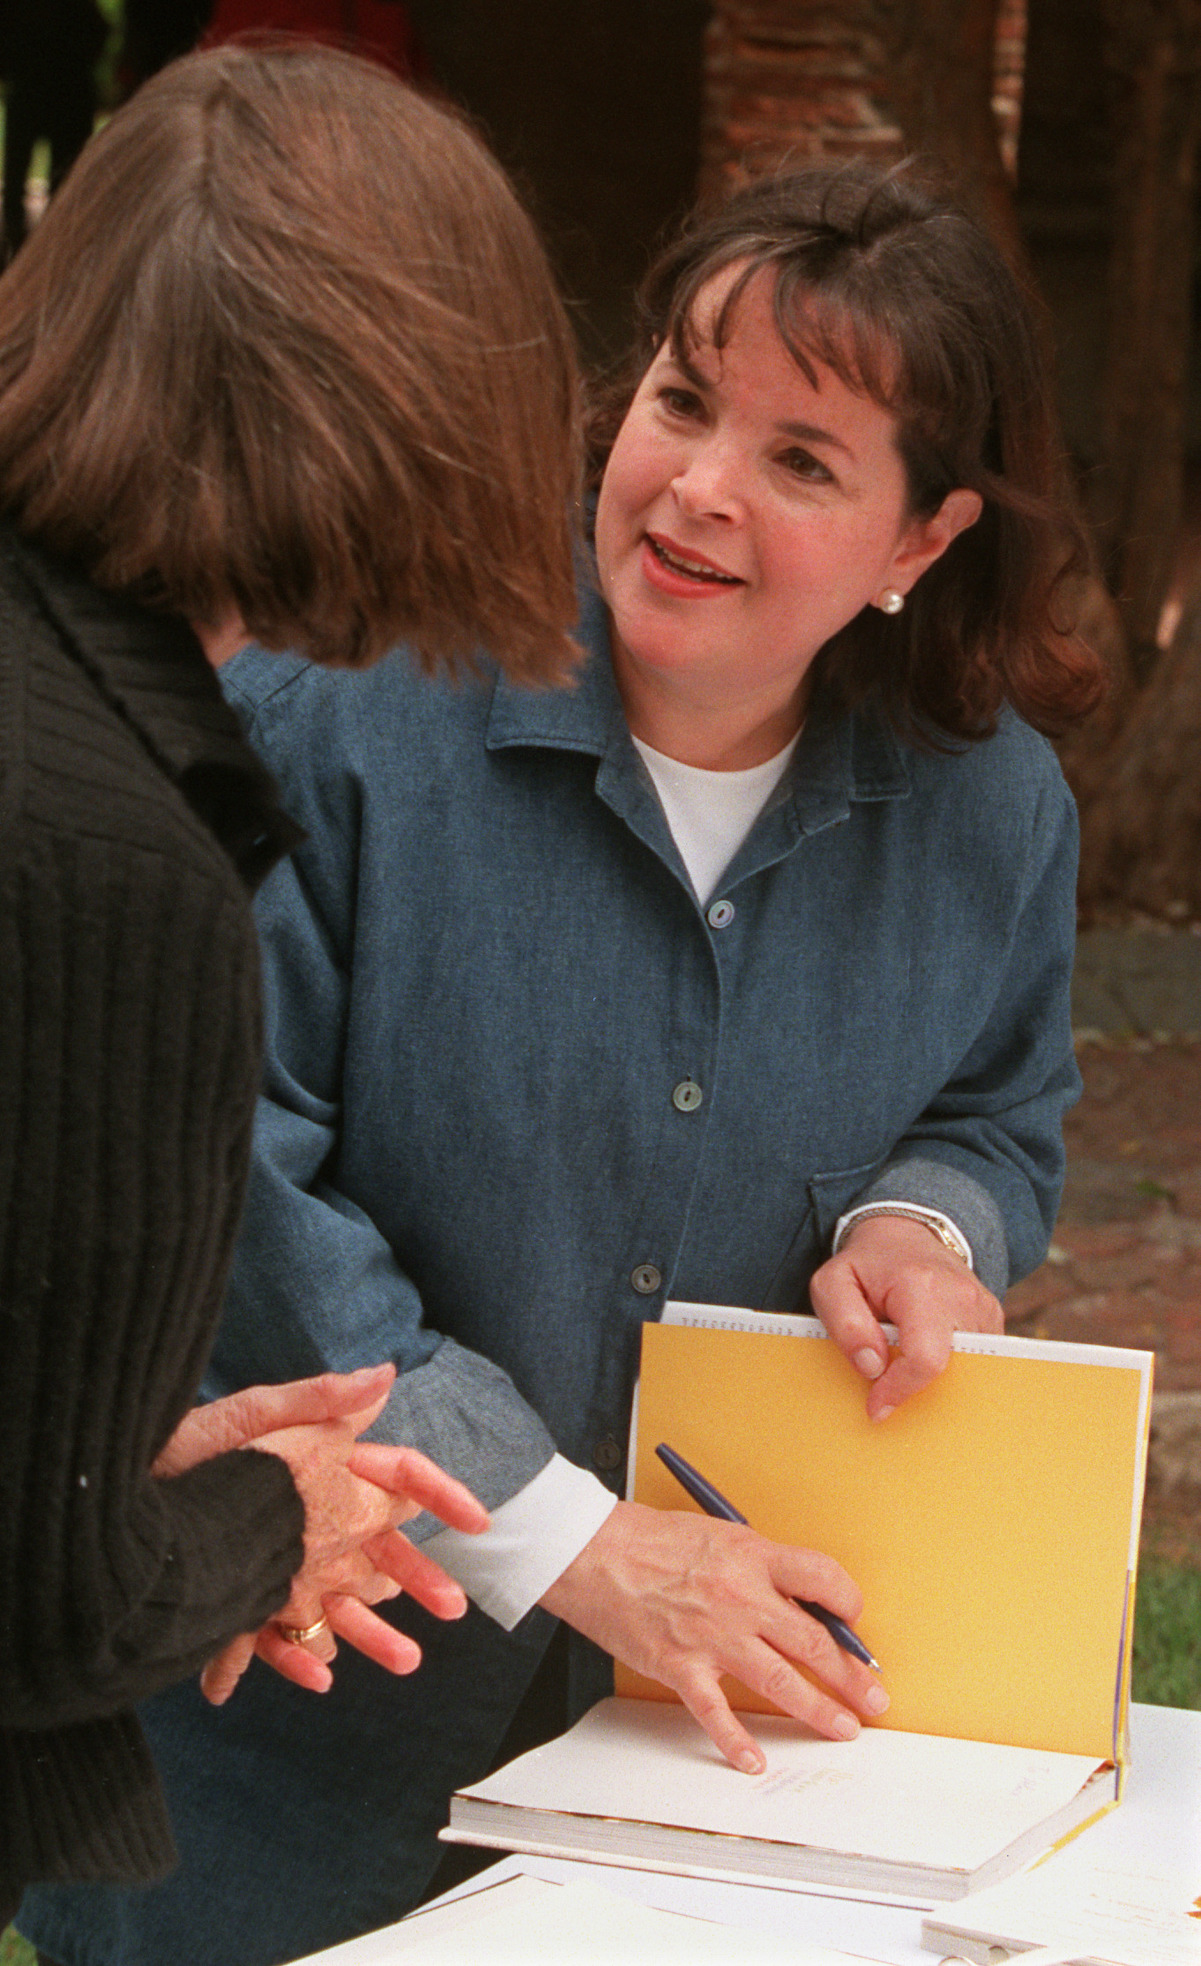 Ina Garten at a book signing for 'The Barefoot Contessa Cookbook' in 1999